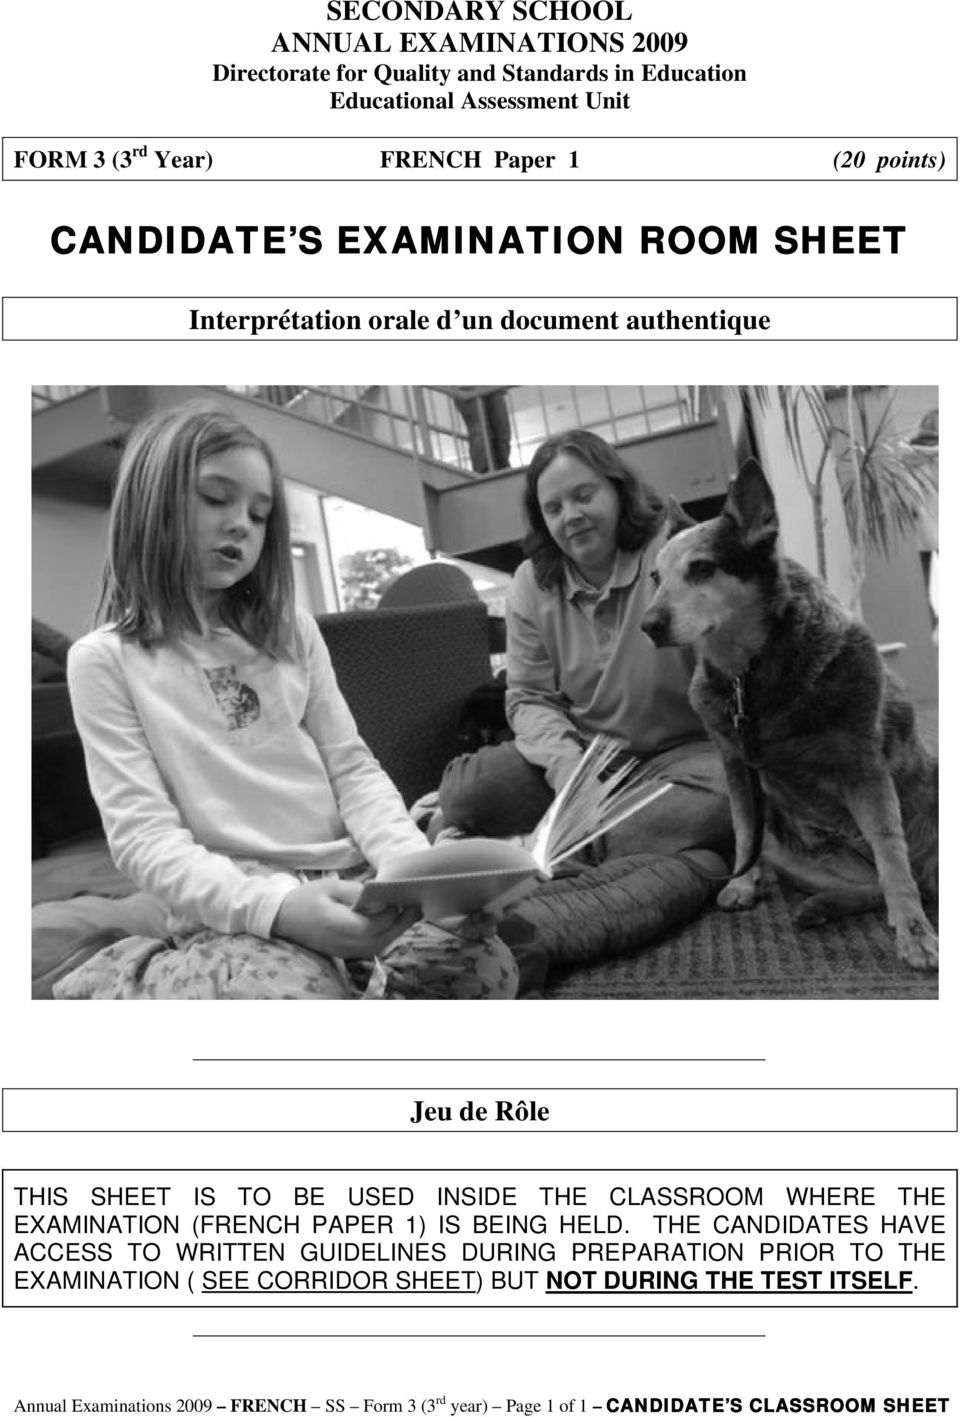 HELD. THE CANDIDATES HAVE ACCESS TO WRITTEN GUIDELINES DURING PREPARATION PRIOR TO THE EXAMINATION ( SEE CORRIDOR